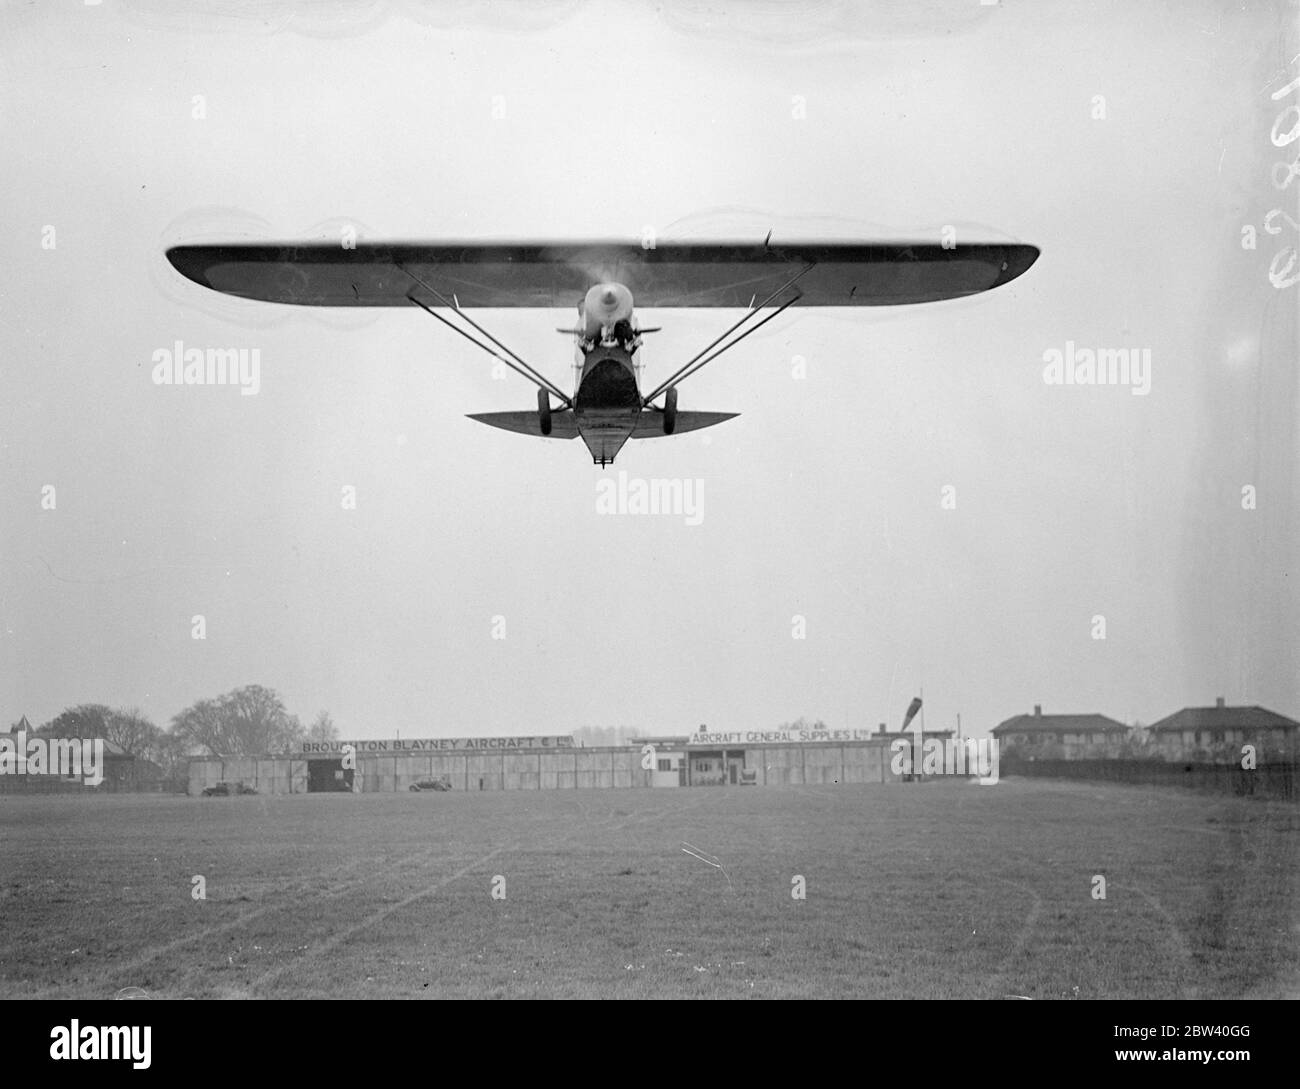 New £180 aeroplane demonstrated At Handsworth Aerodrome. A £180 light aeroplane, the cheapest made, was demonstrated for the first time at Hanworth Aerodrome. The machine was designed and manufactured by Captain C. H. Latimer-Needham of Luton Aircraft. It is equipped with a motor-cycle engine which runs on ordinary commercial spirit that can be drawn from any petrol pump. The machine has a speed of 85 miles an hour with a range of 300 miles. Photo shows: the new aeroplane, piloted by Mr D. Berrington, in the air at Hanworth Aerodrome. 24 April 1937 Stock Photo